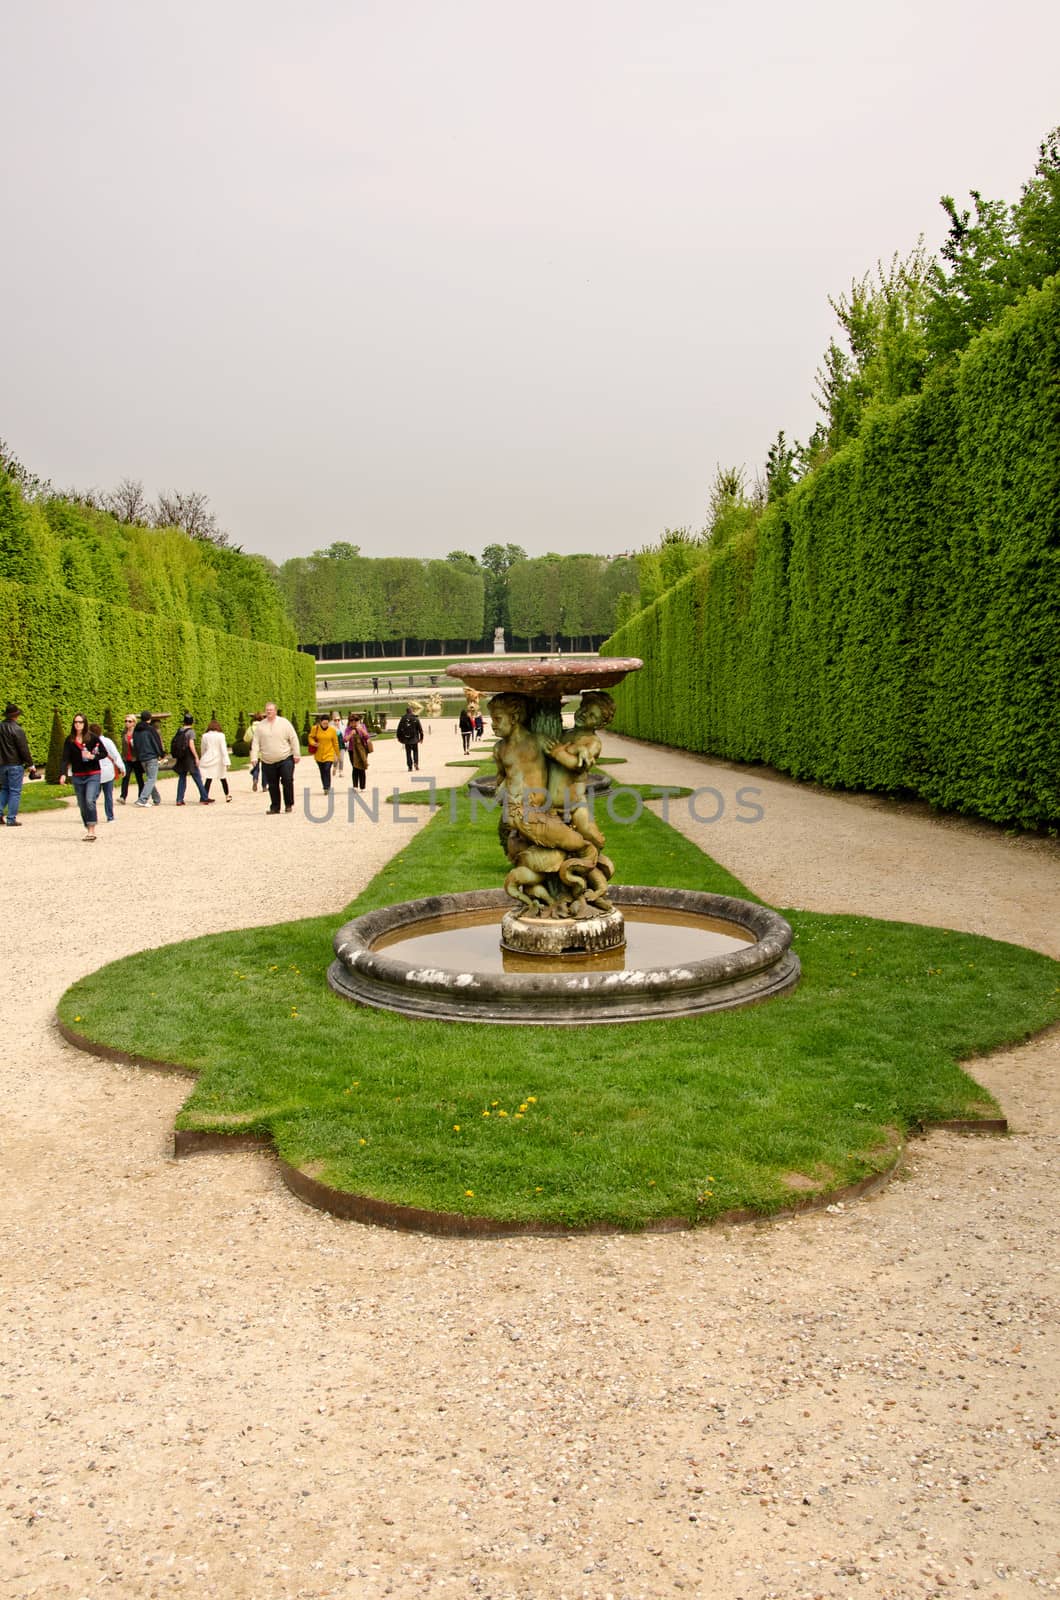 Palace of Versailles, France by lauria